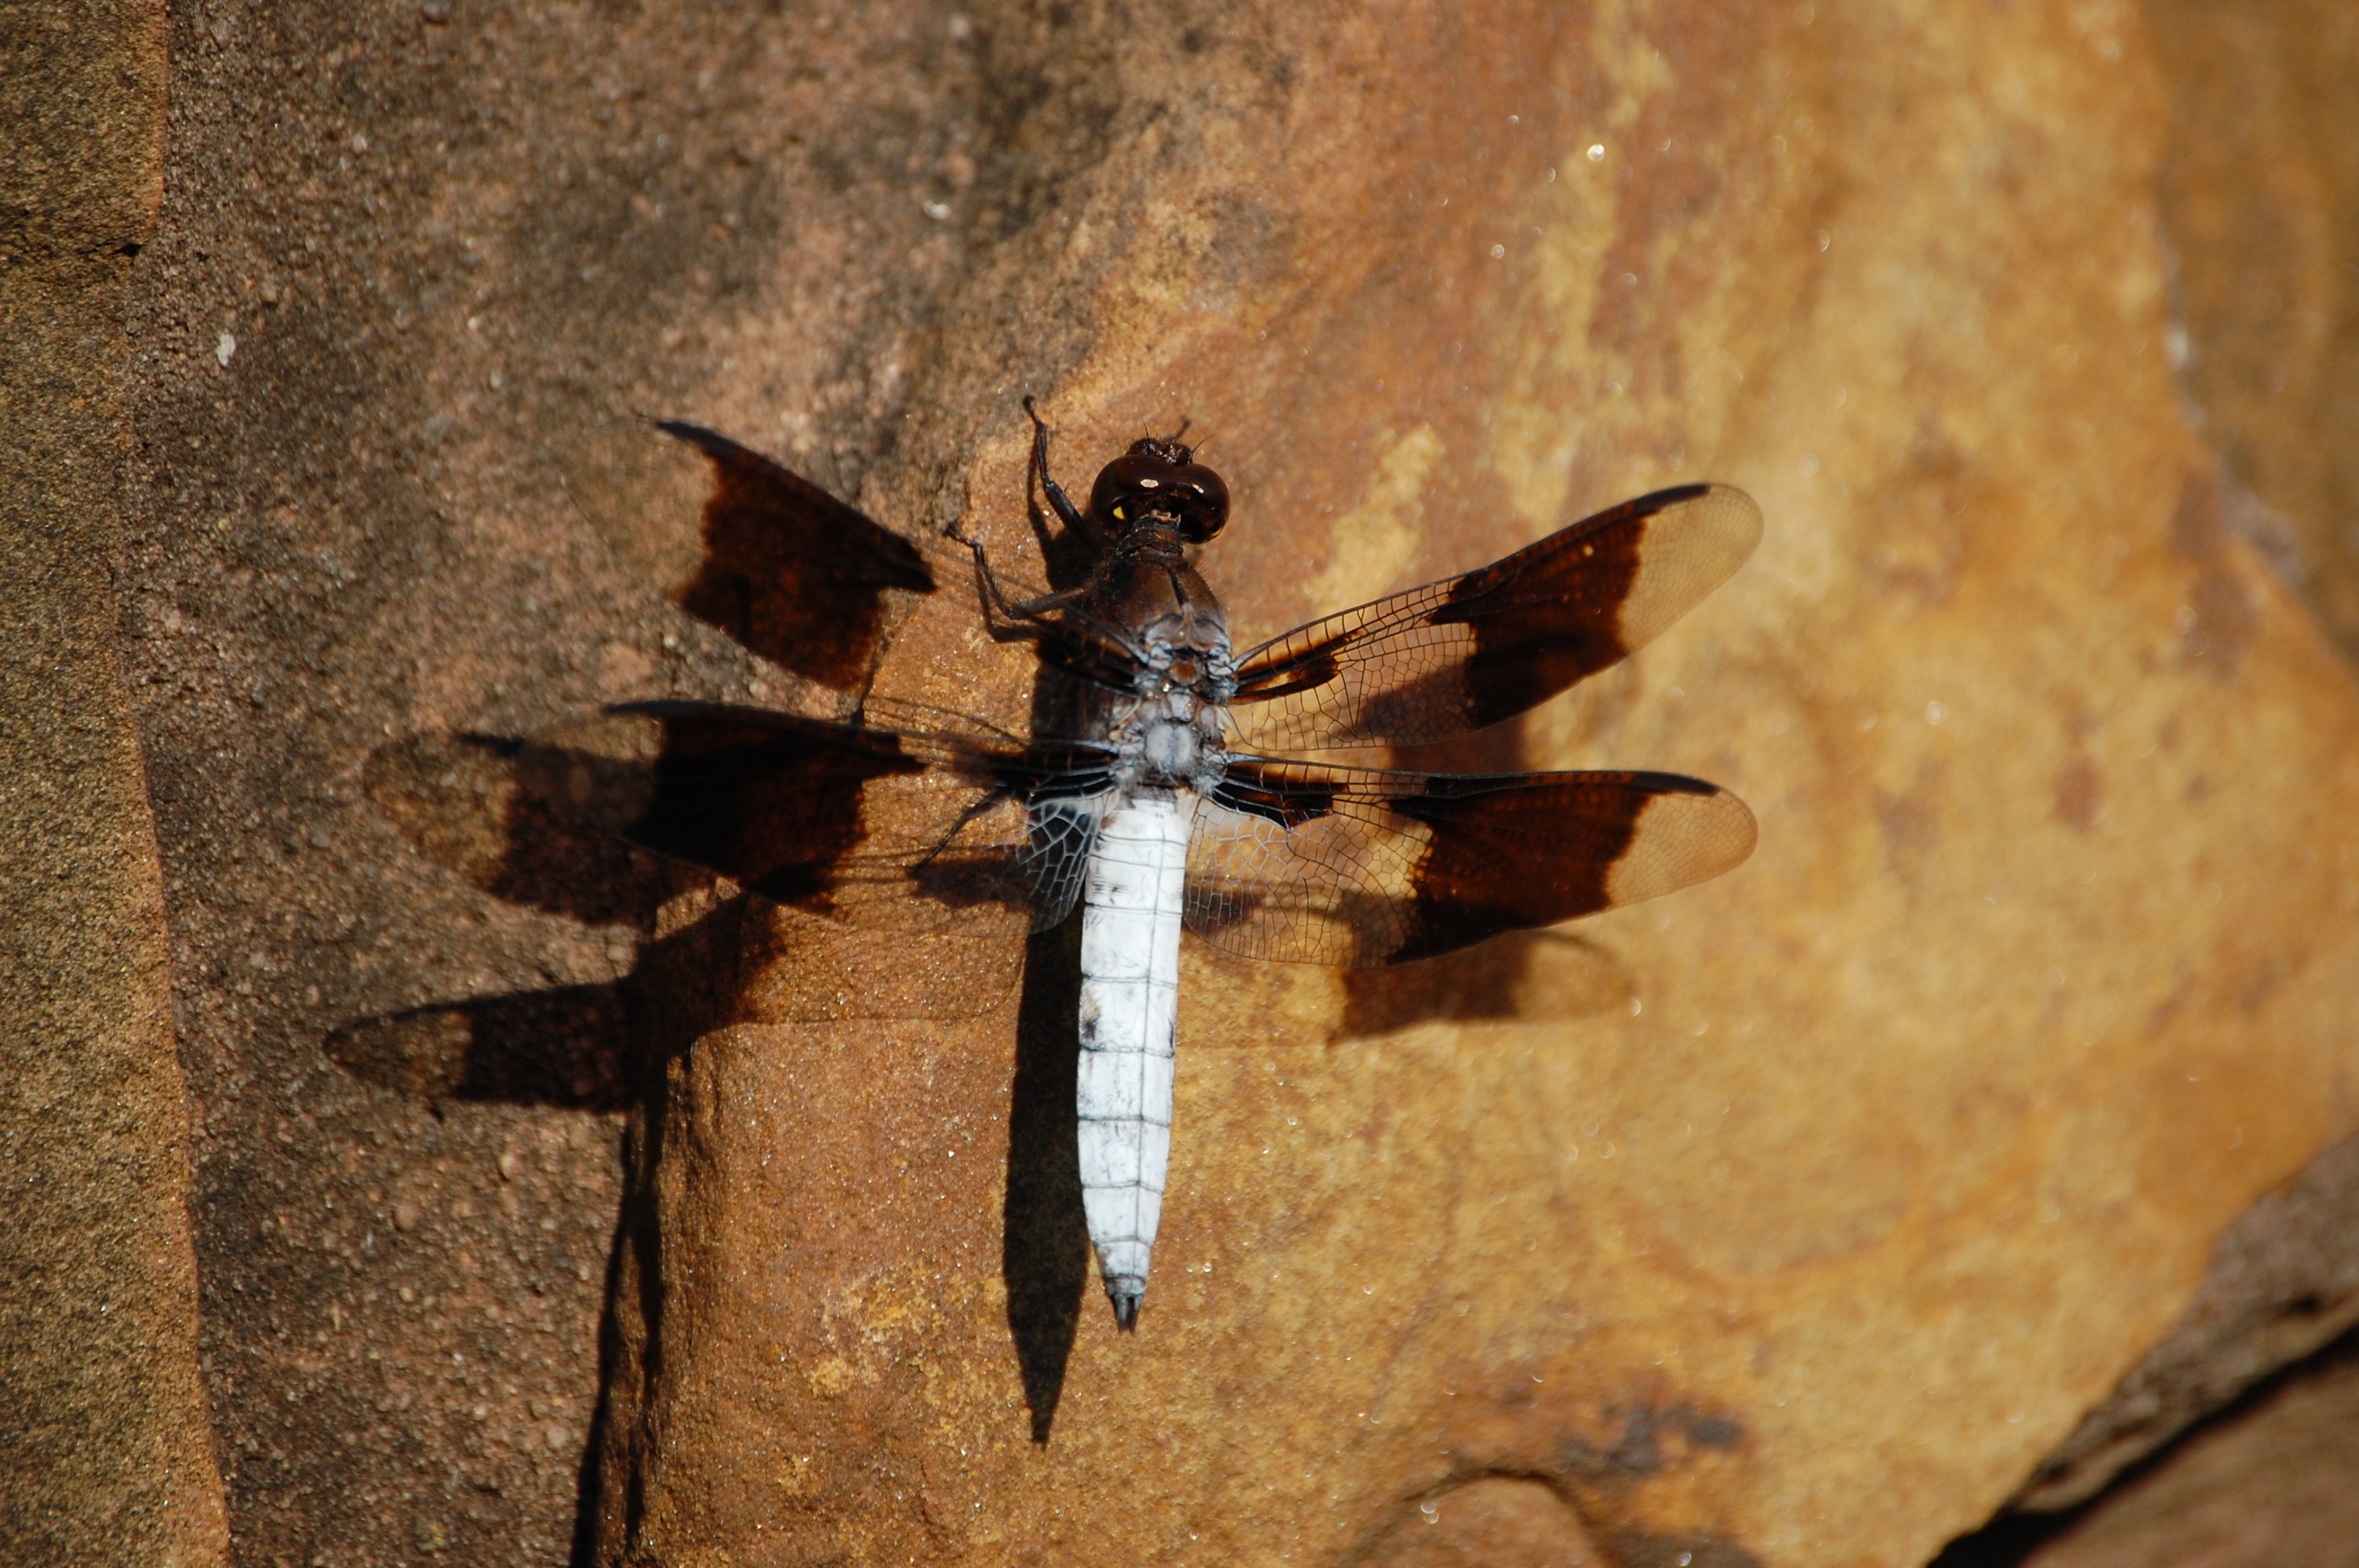 brown and white dragonfly